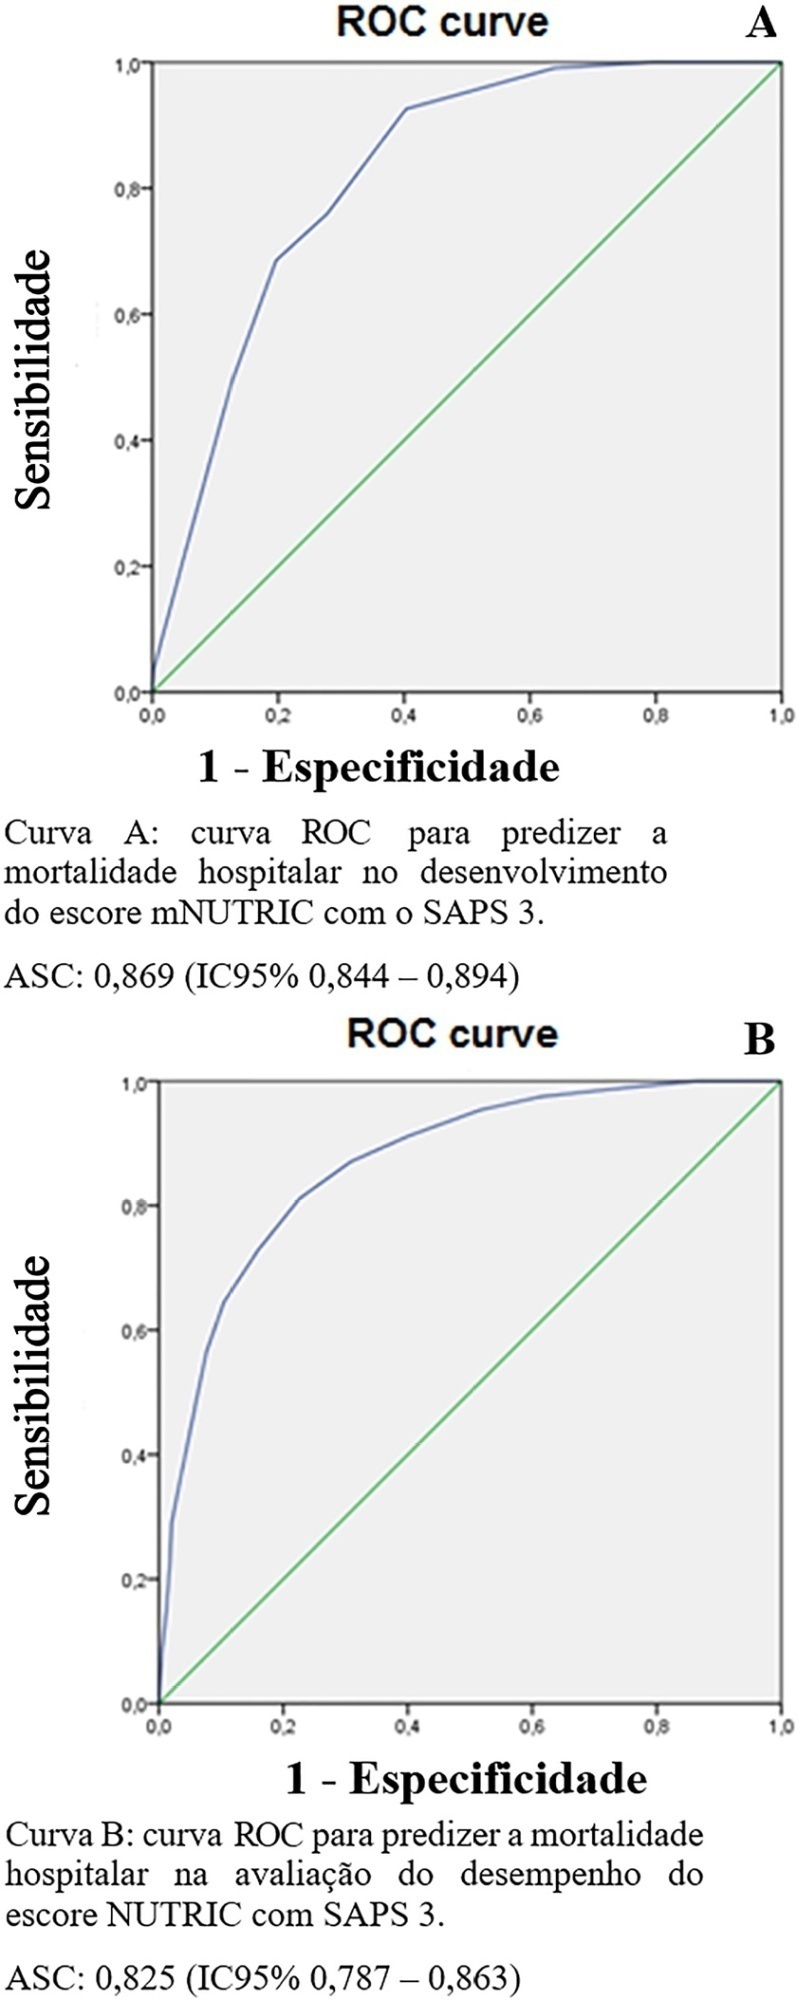 SAPS 3 in the modified NUTrition RIsk in the Critically ill score has comparable predictive accuracy to APACHE II as a severity marker